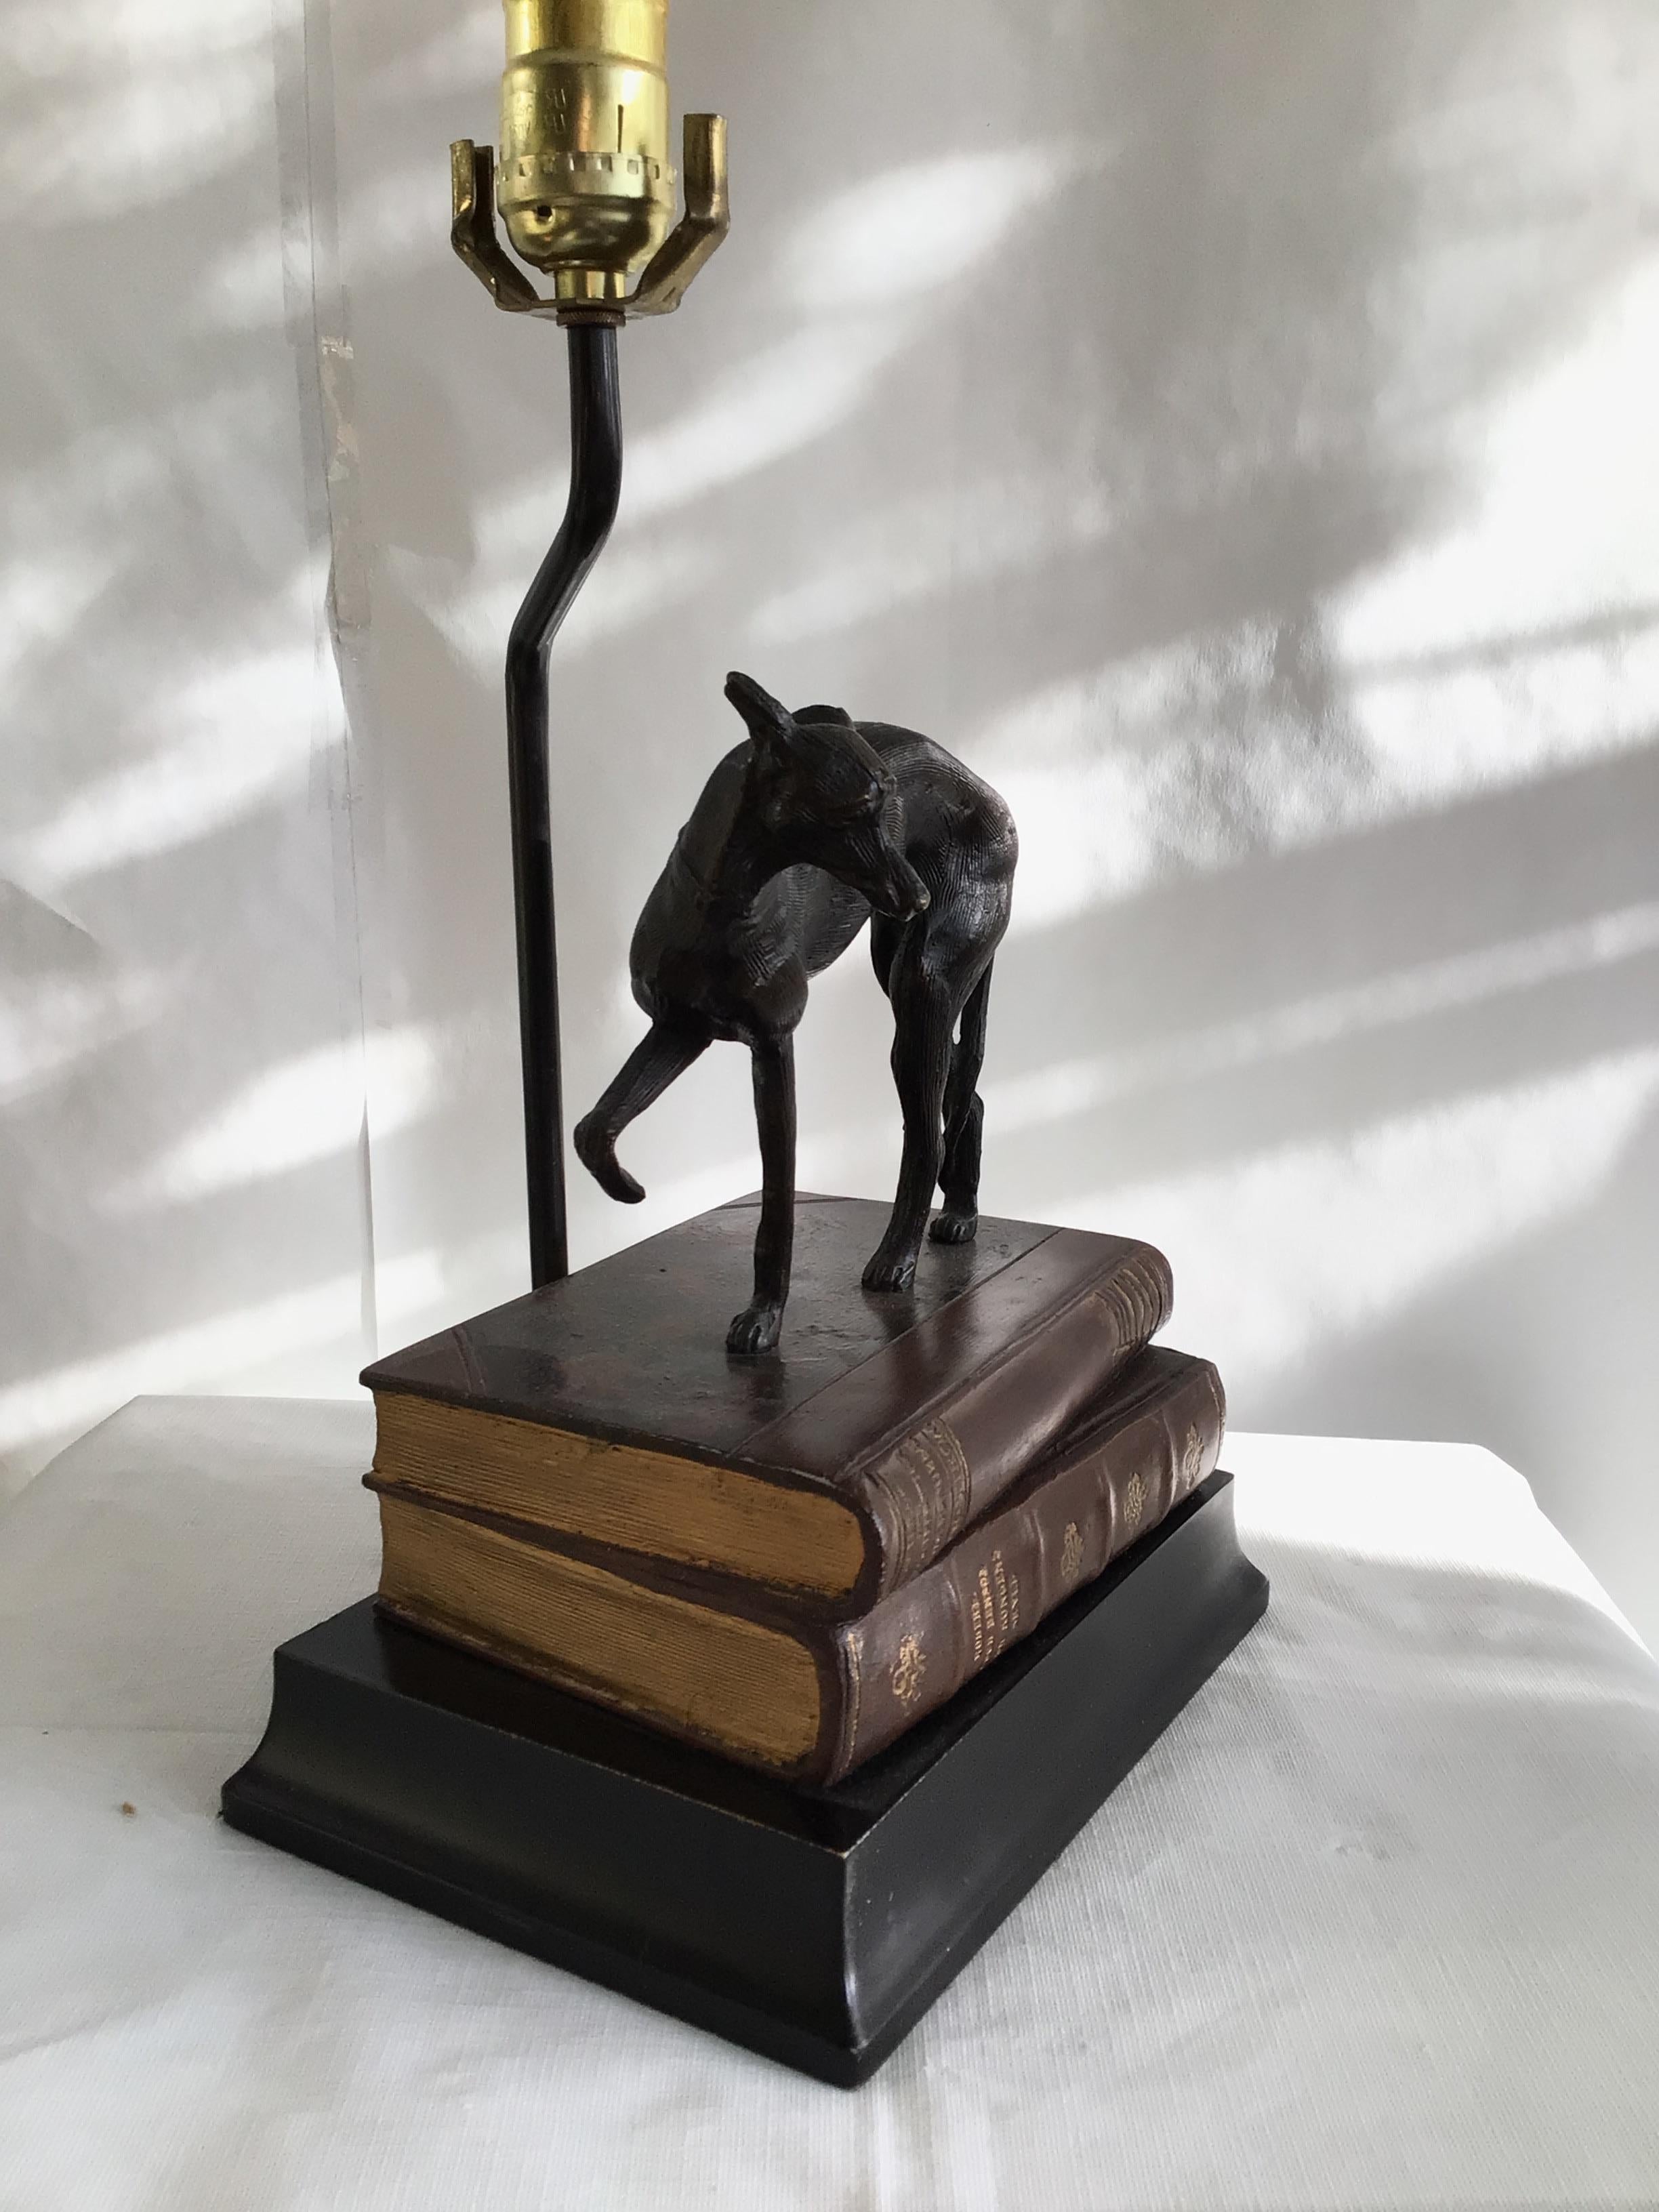 1970s Metal Whippet / Greyhound Dog Standing on Stack of Books Lamp on wooden base (painted)
Height is 15